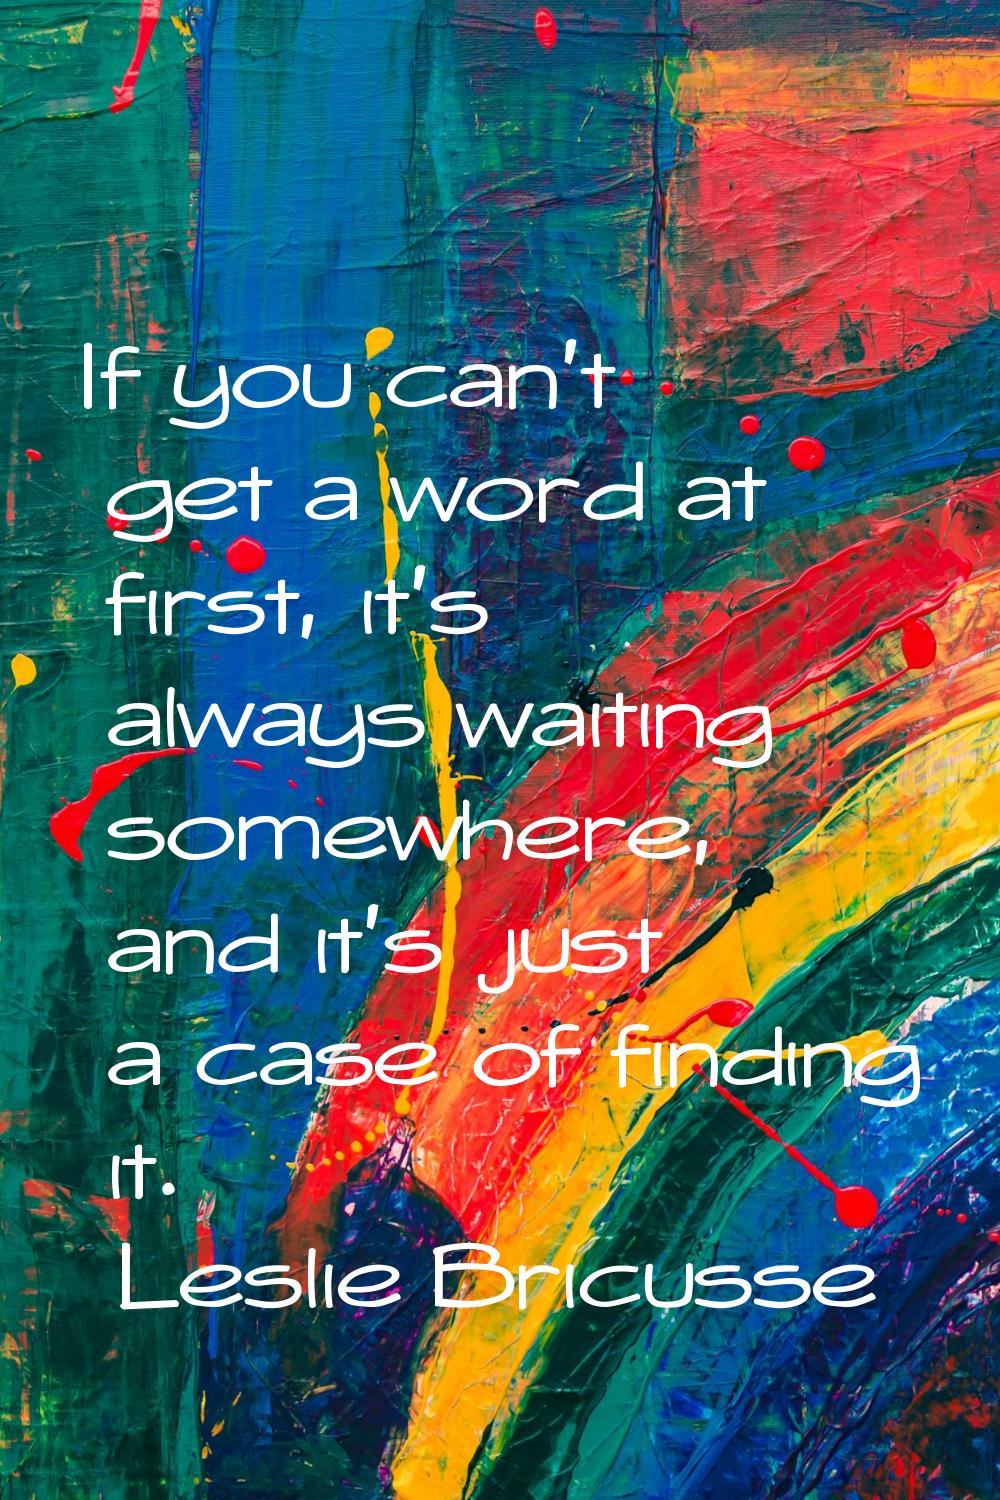 If you can't get a word at first, it's always waiting somewhere, and it's just a case of finding it